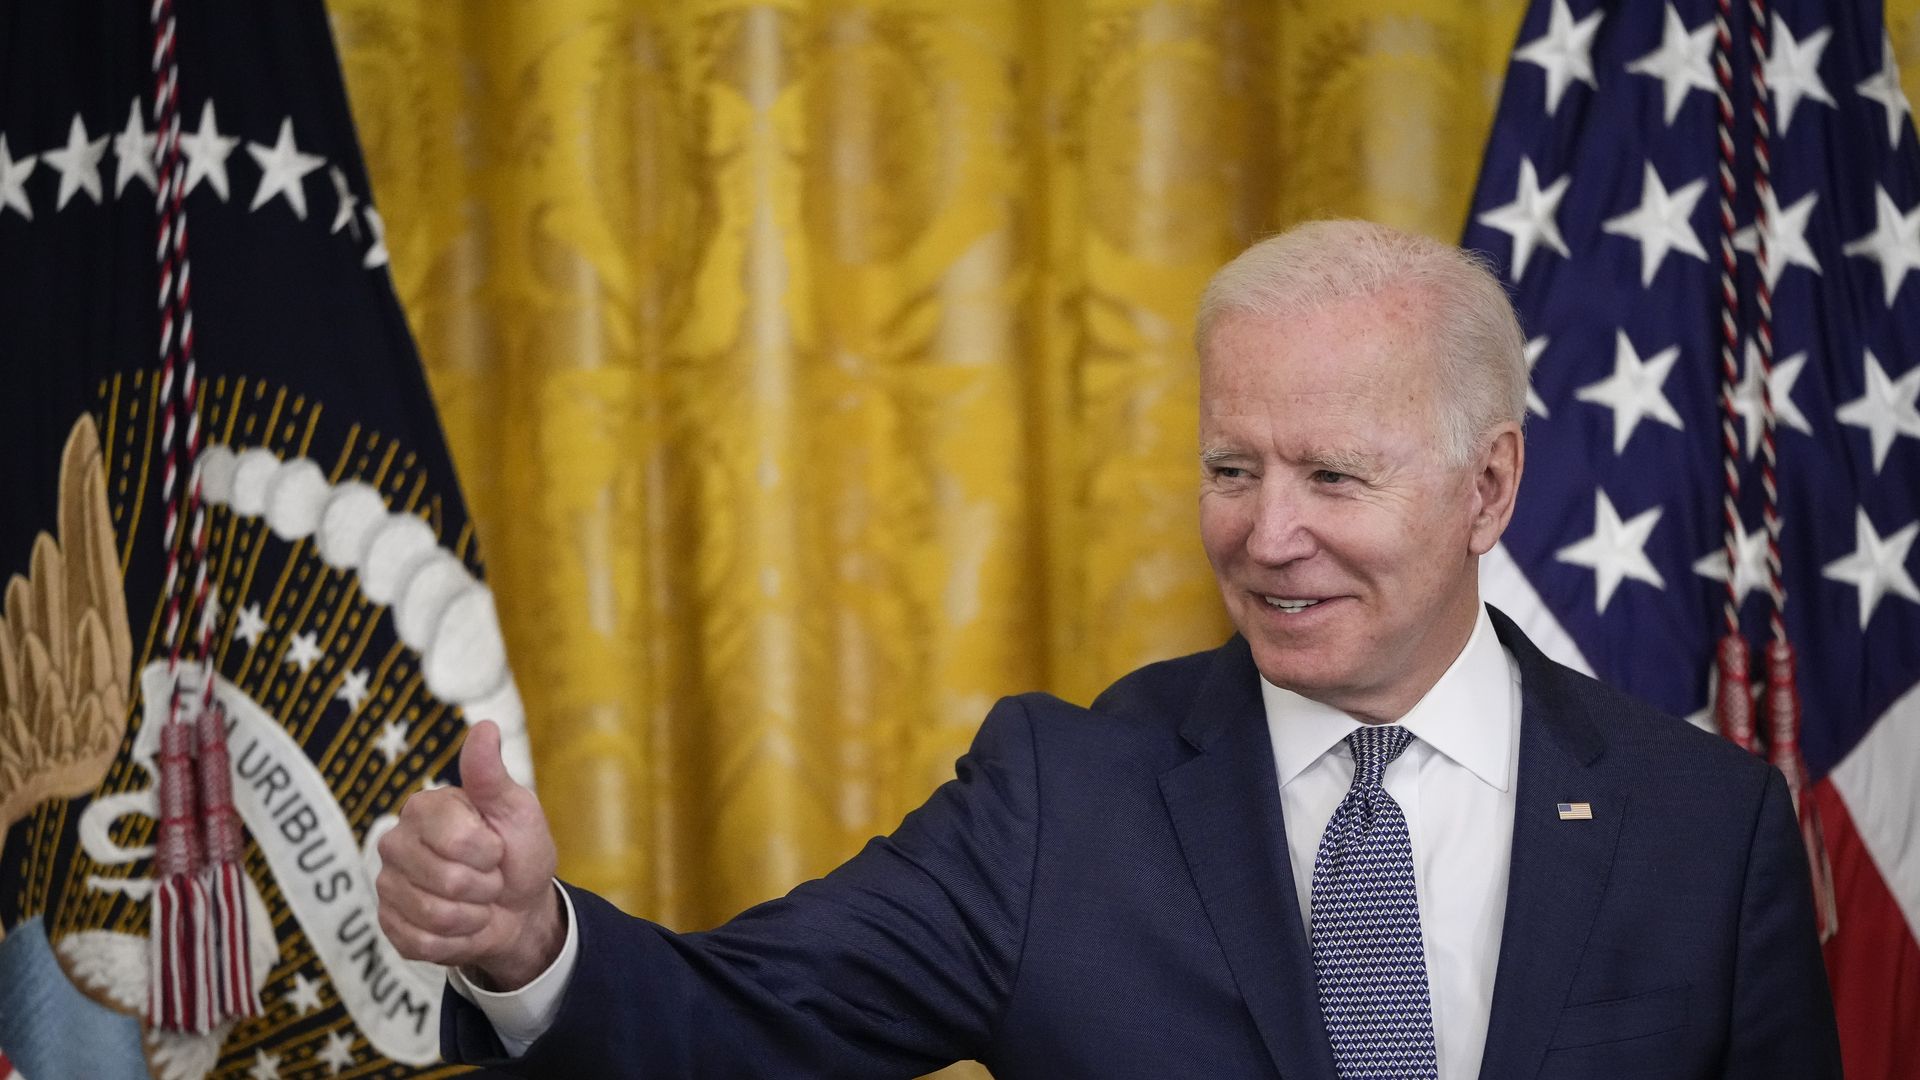 Biden with his Thumbs up